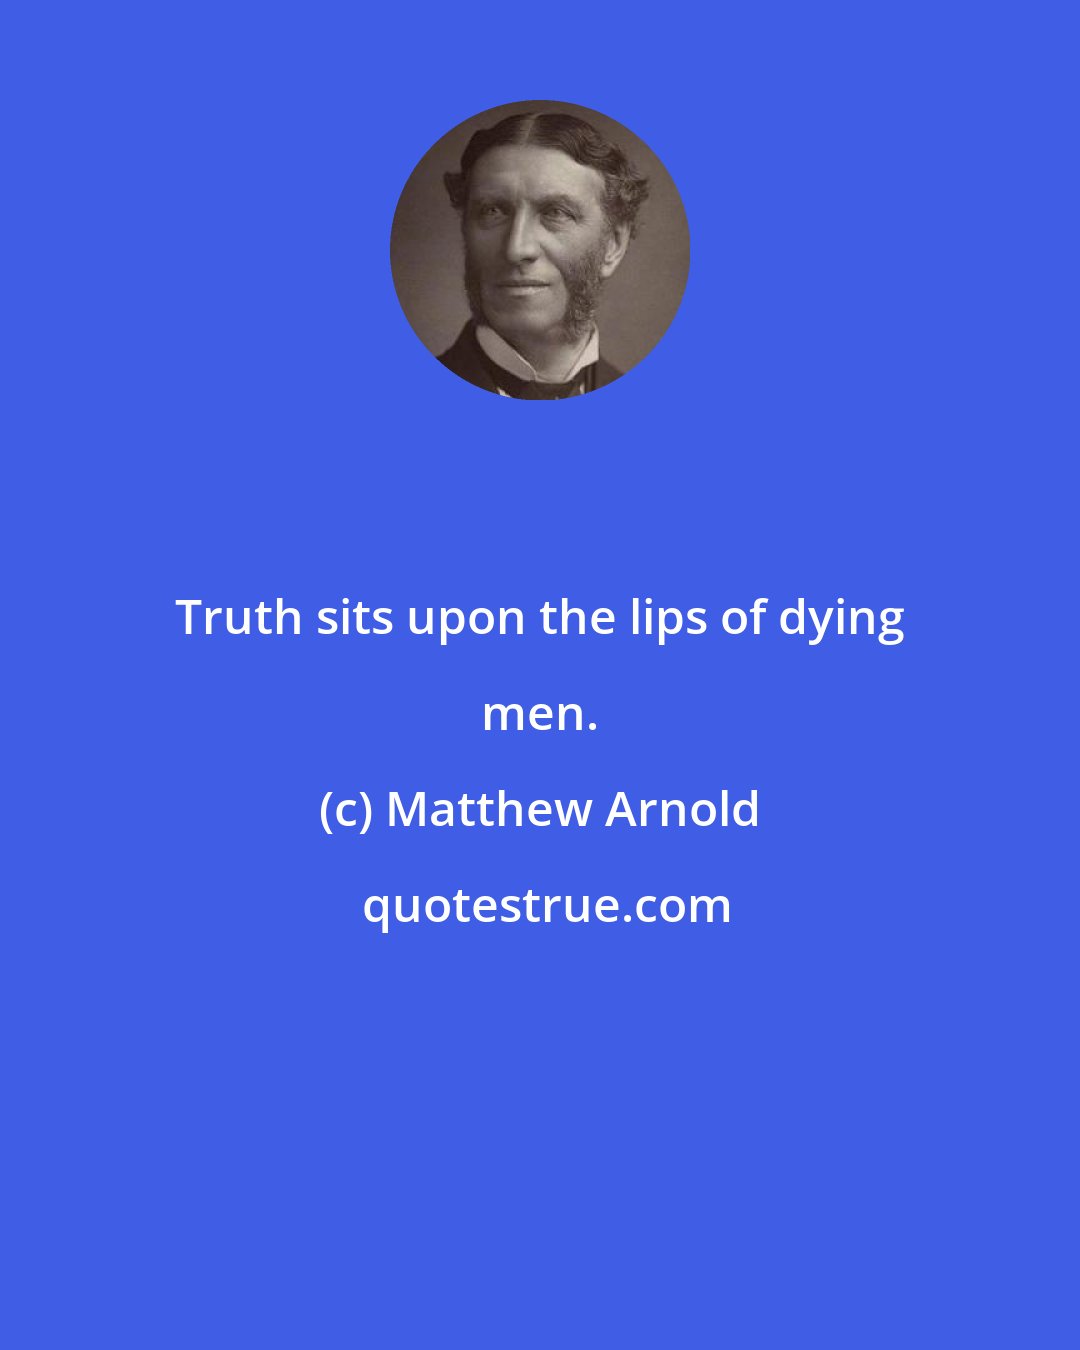 Matthew Arnold: Truth sits upon the lips of dying men.